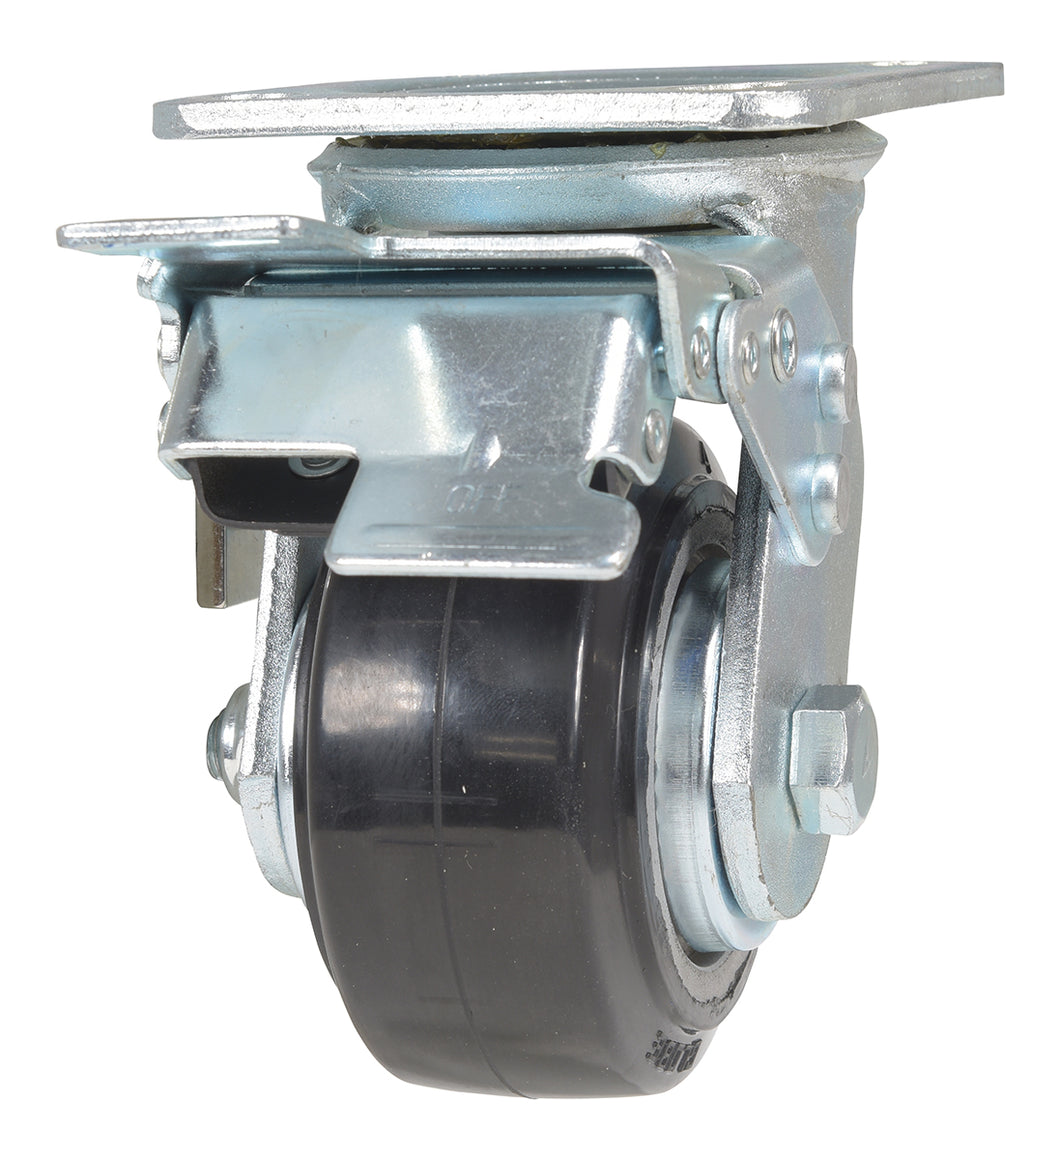 Mold On Rubber (On Aluminum) Casters